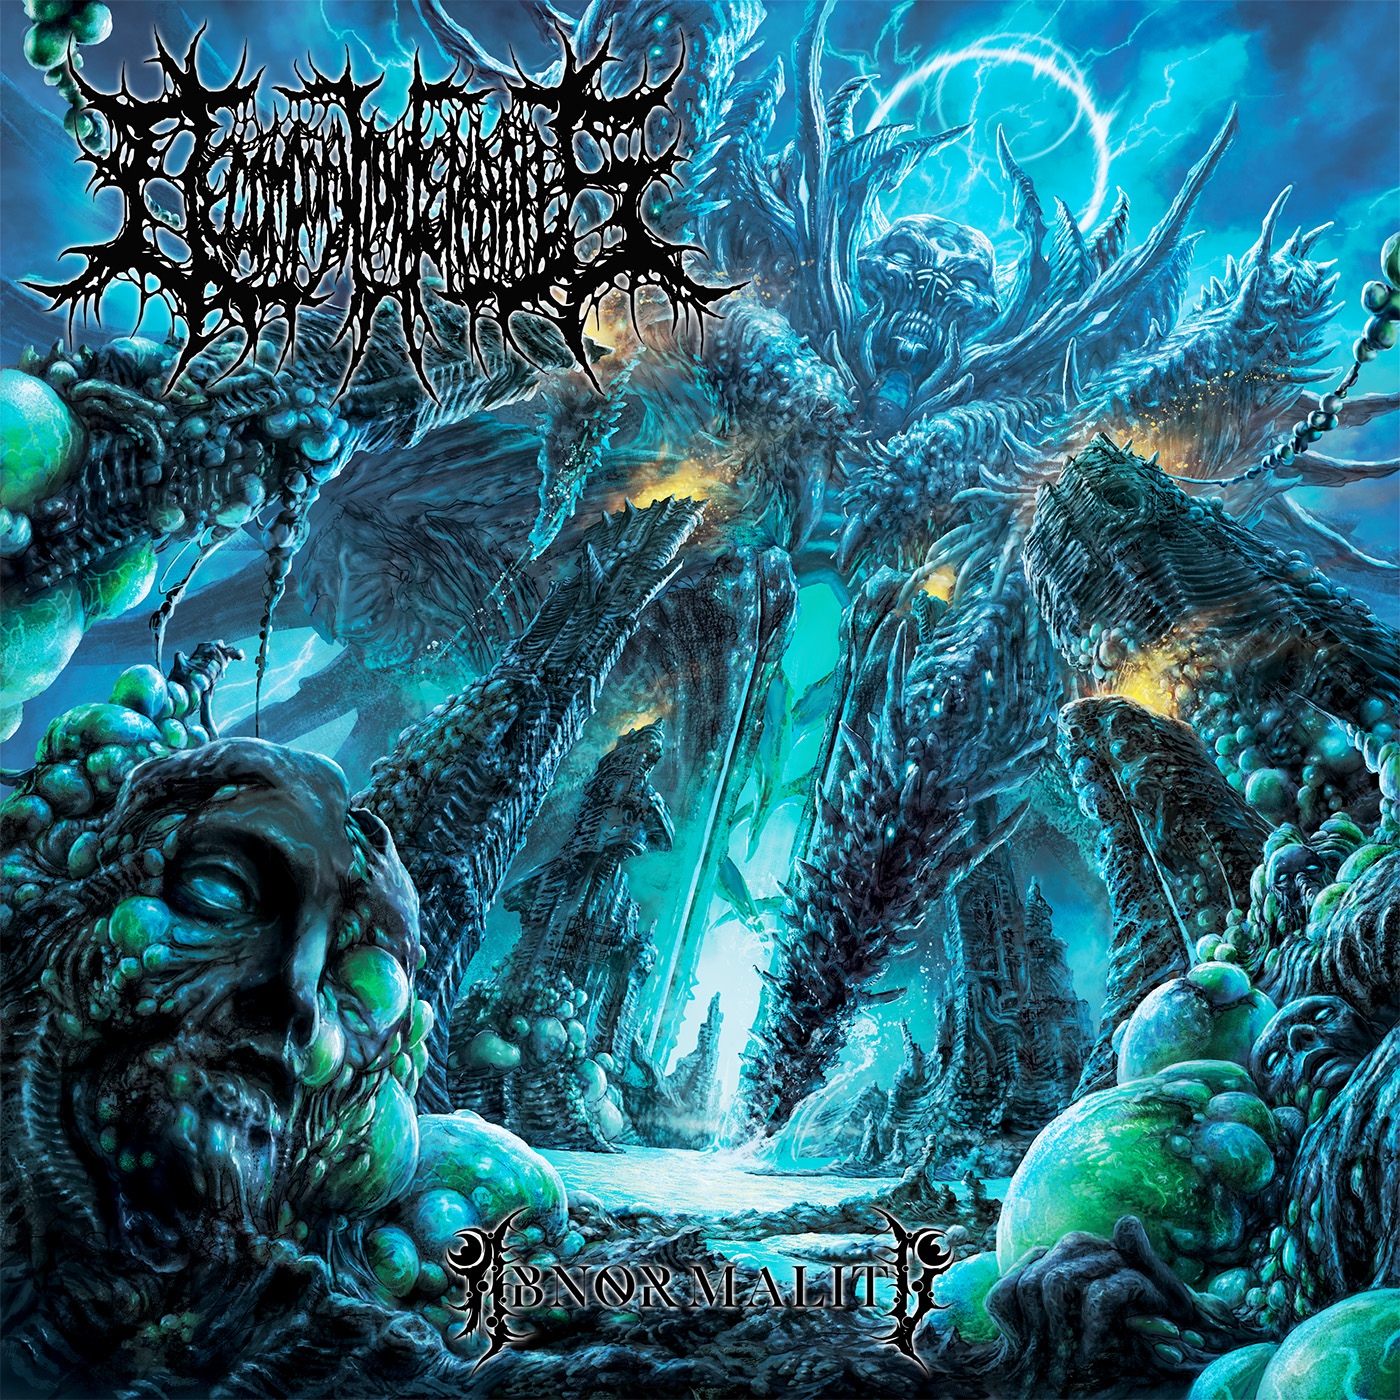 Decomposition Of Entrails - Abnormality (2018) Album Info